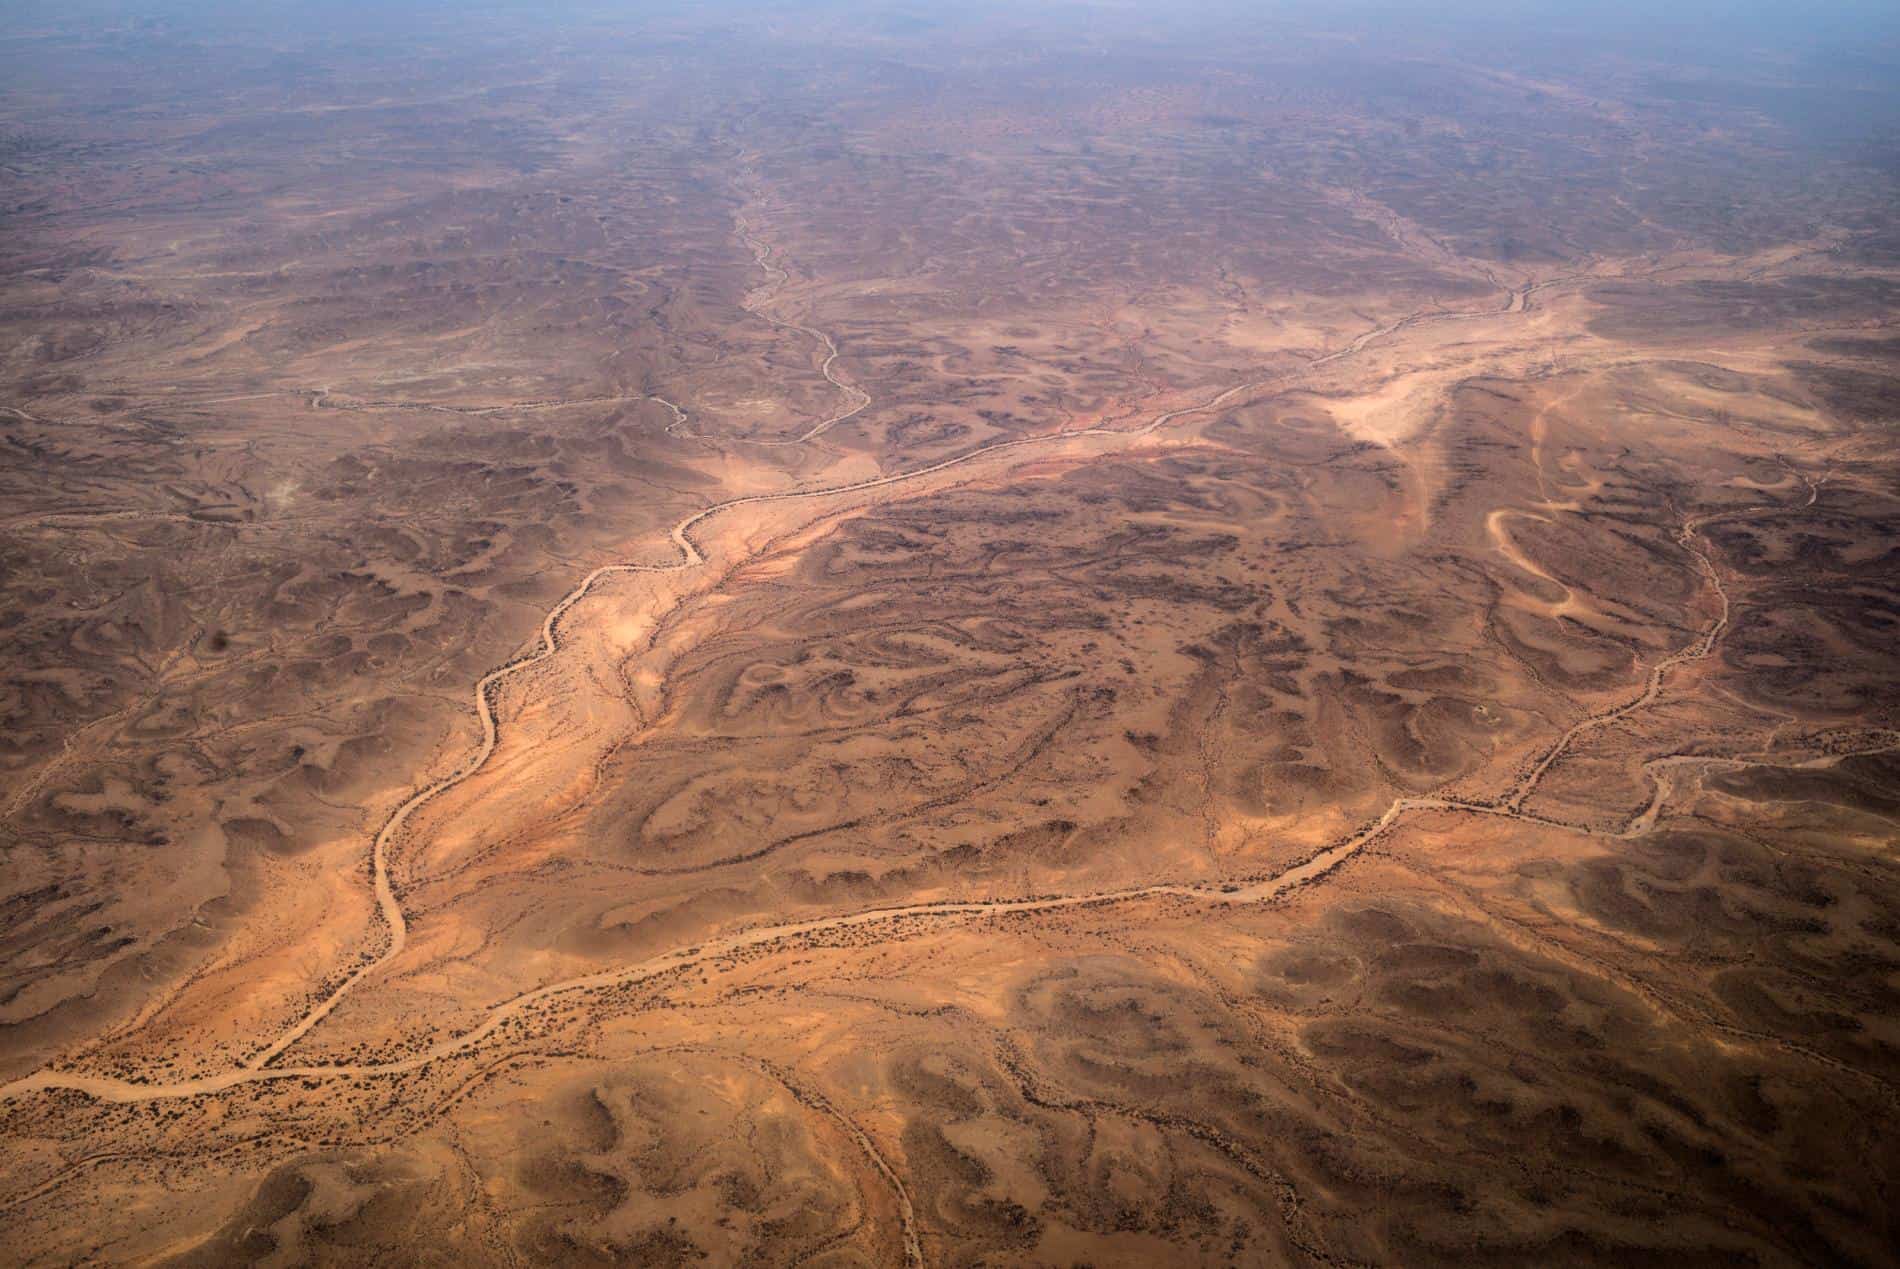 An aerial view shows the dried up landscape in Puntland. [Source: National Geographic]